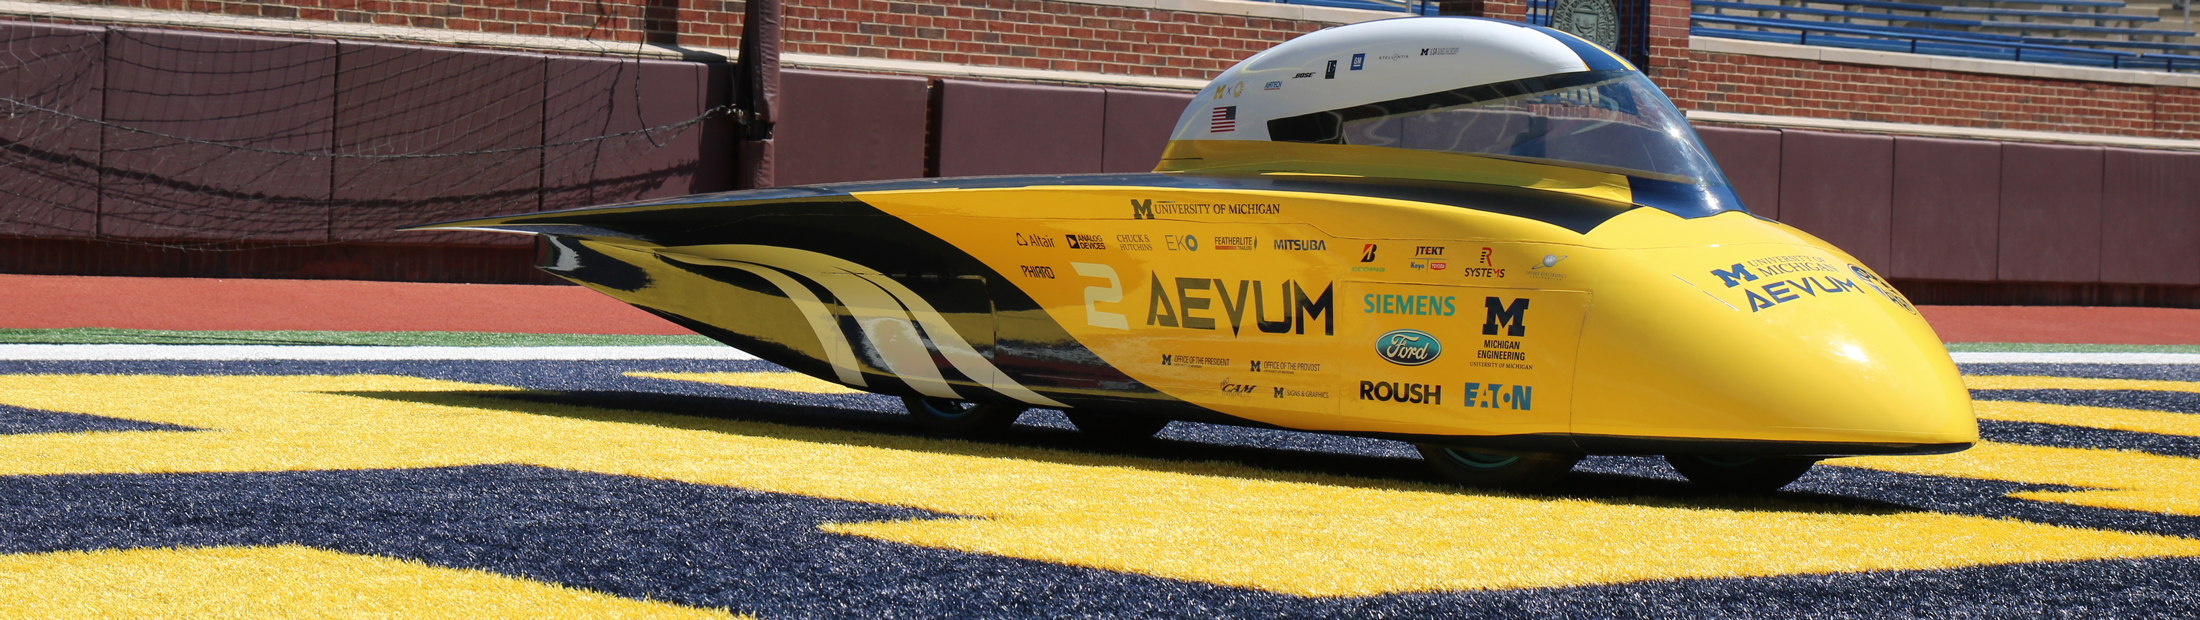 The Aevum solar car sitting in the end zone of the Big House on a sunny day